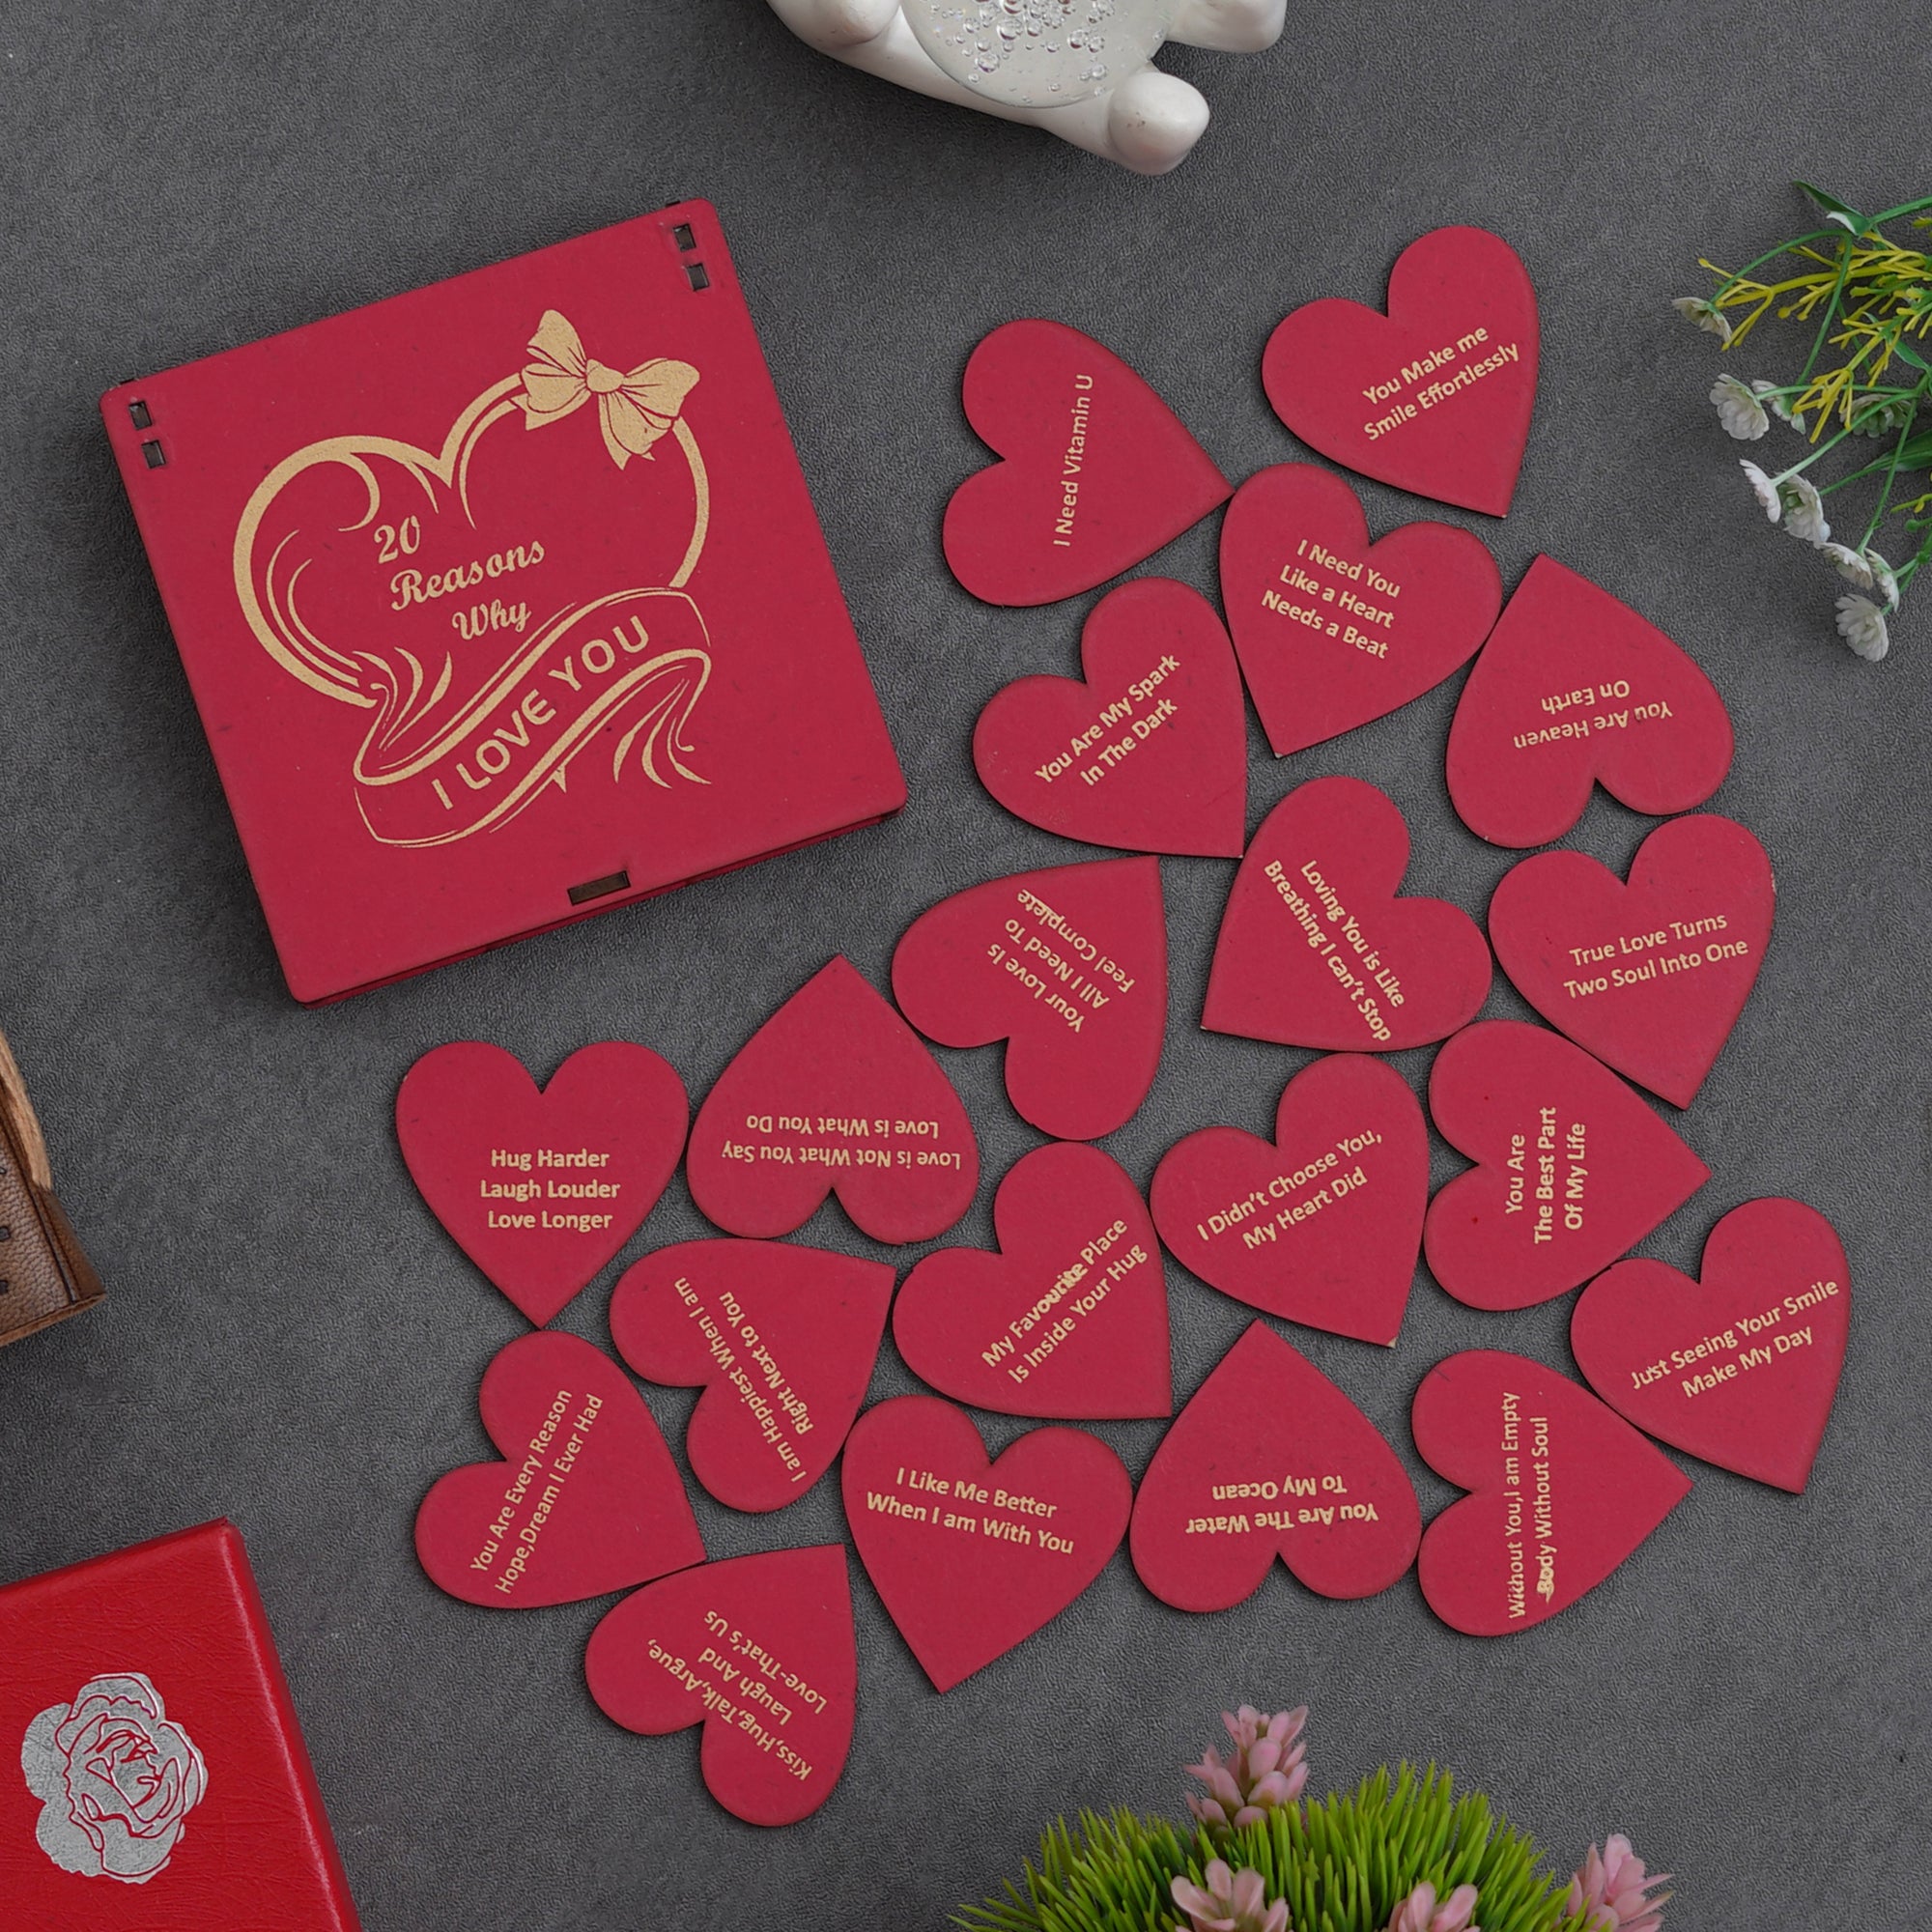 Valentine Combo of Golden Rose Gift Set, "20 Reasons Why I Love You" Printed on Little Red Hearts Decorative Wooden Gift Set Box 3